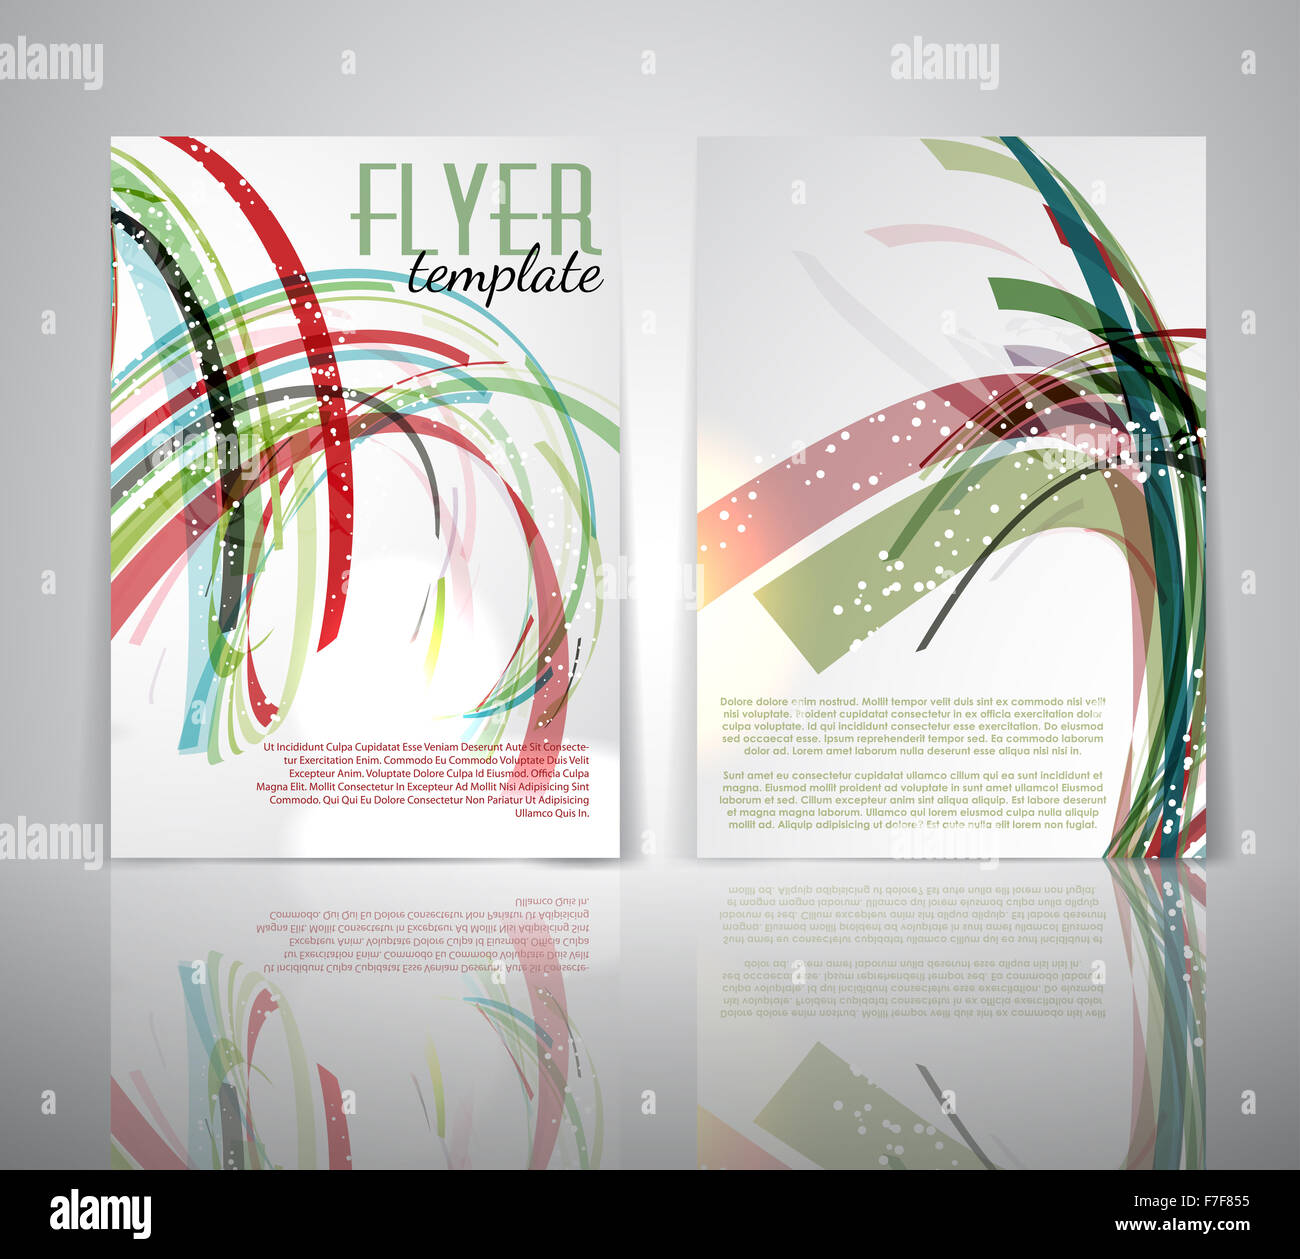 Double sided flyer template with abstract design Stock Photo